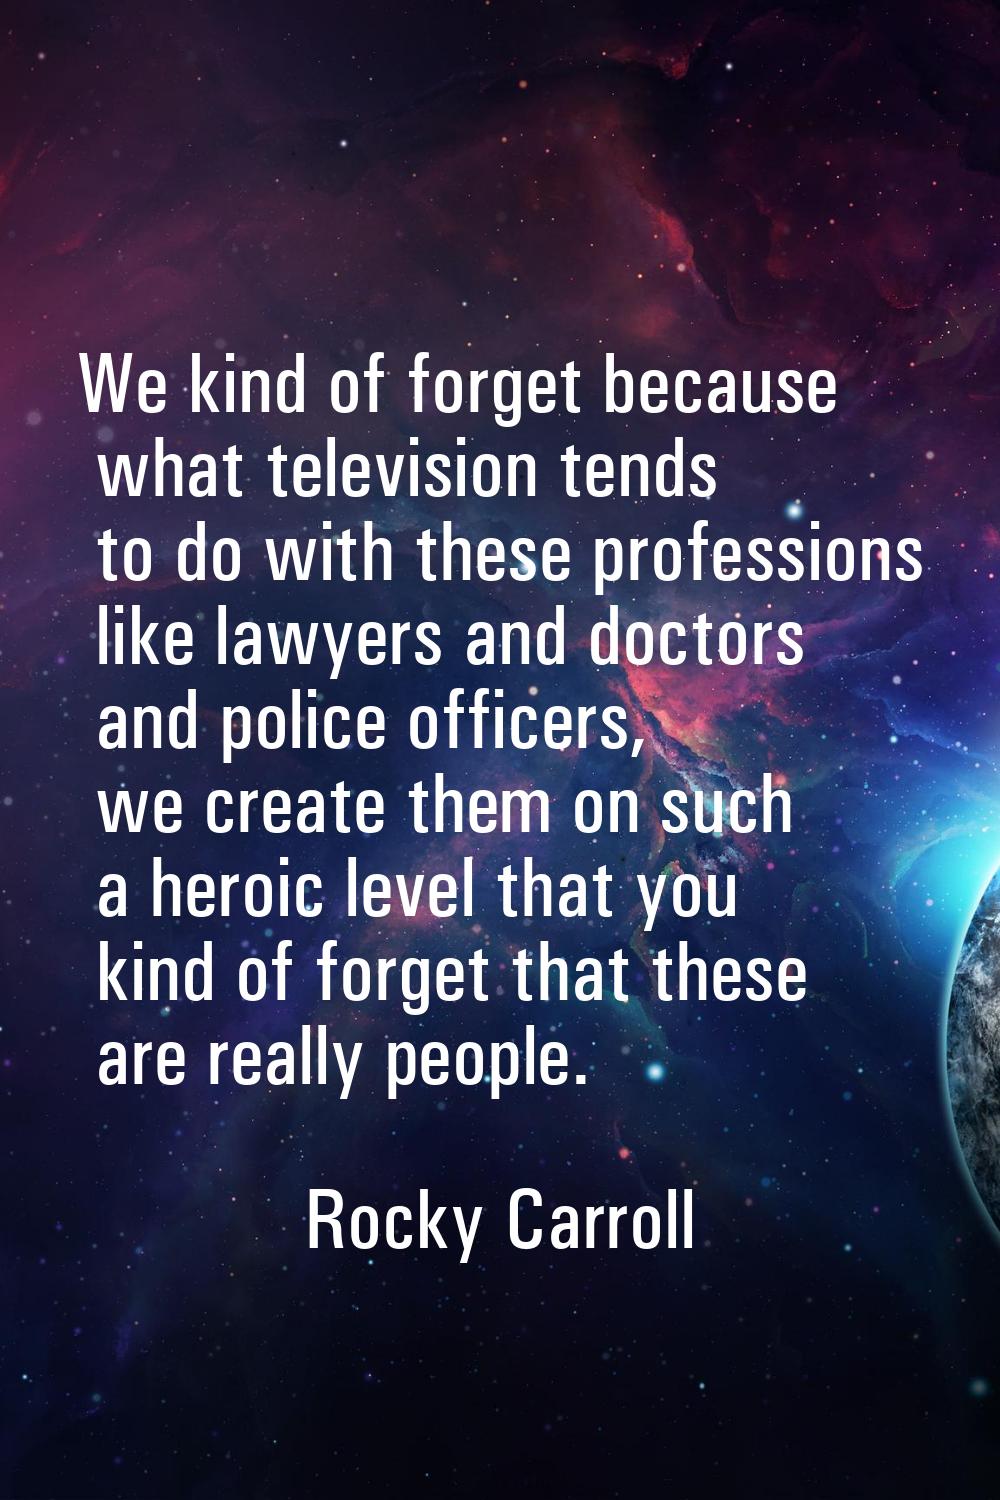 We kind of forget because what television tends to do with these professions like lawyers and docto